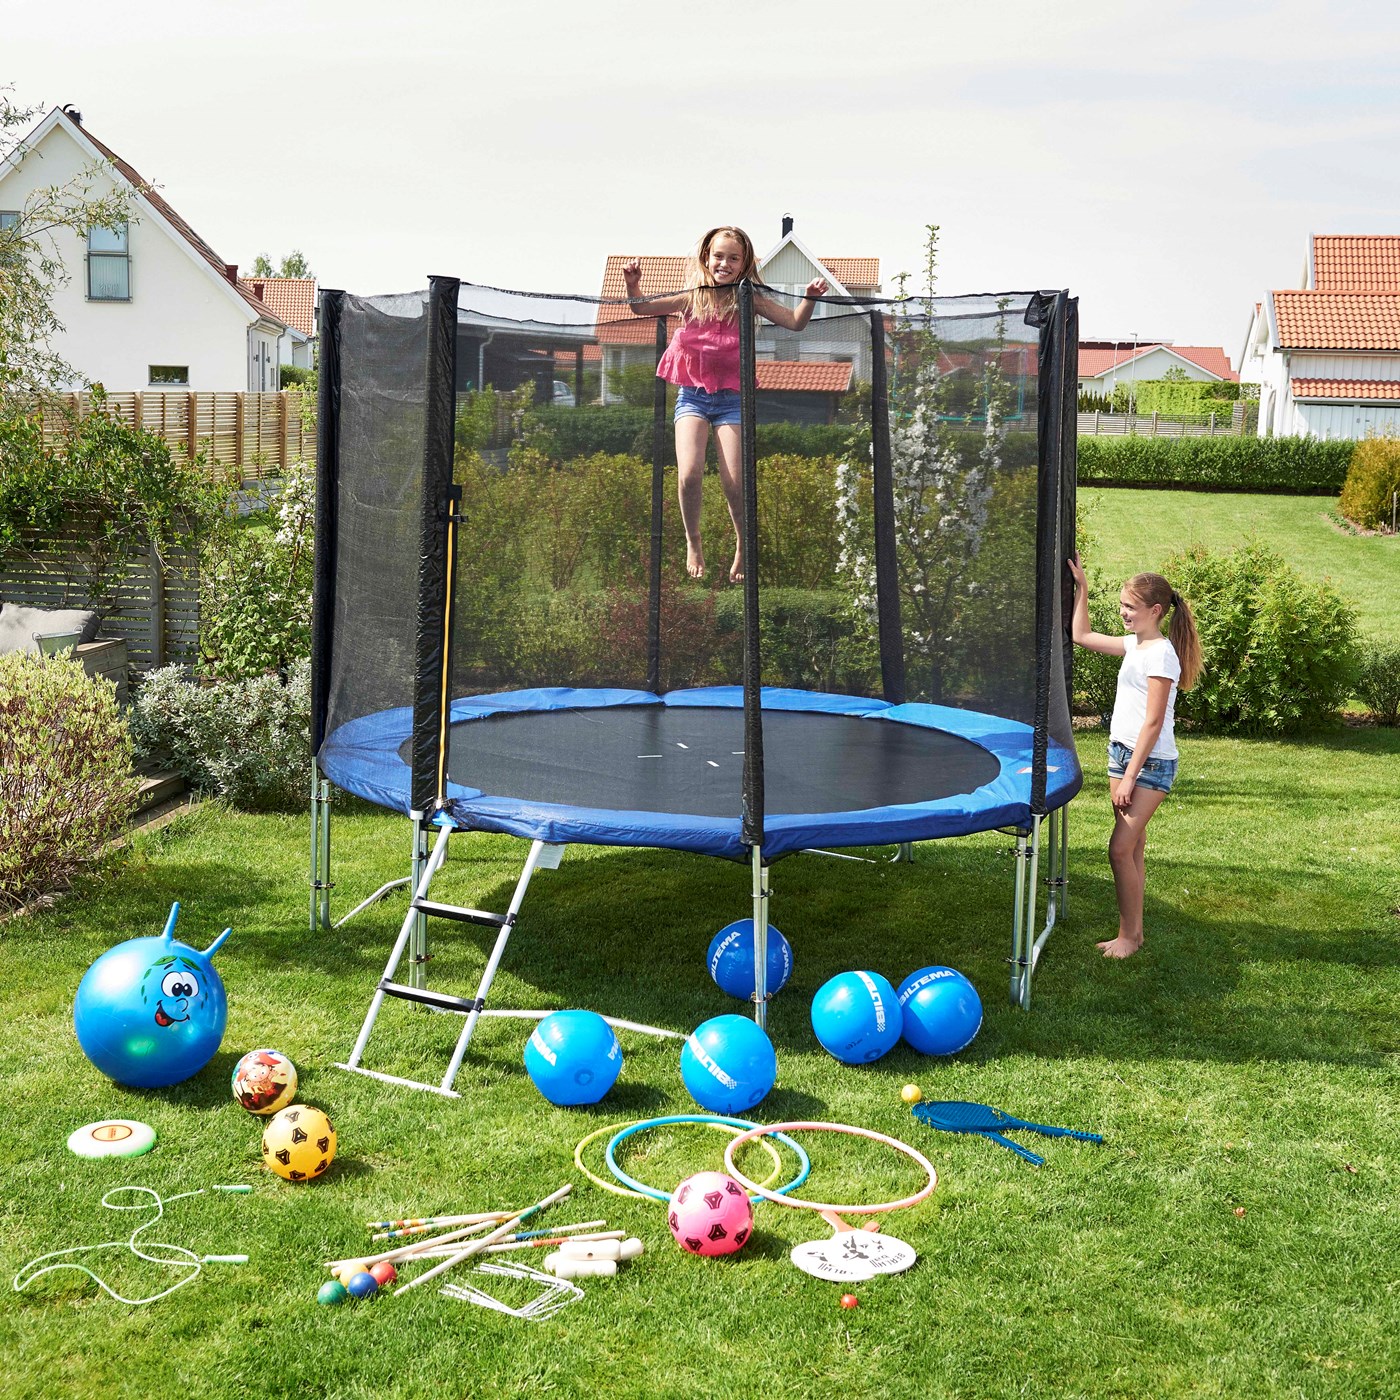 How to take care of the trampoline - for the safety of children